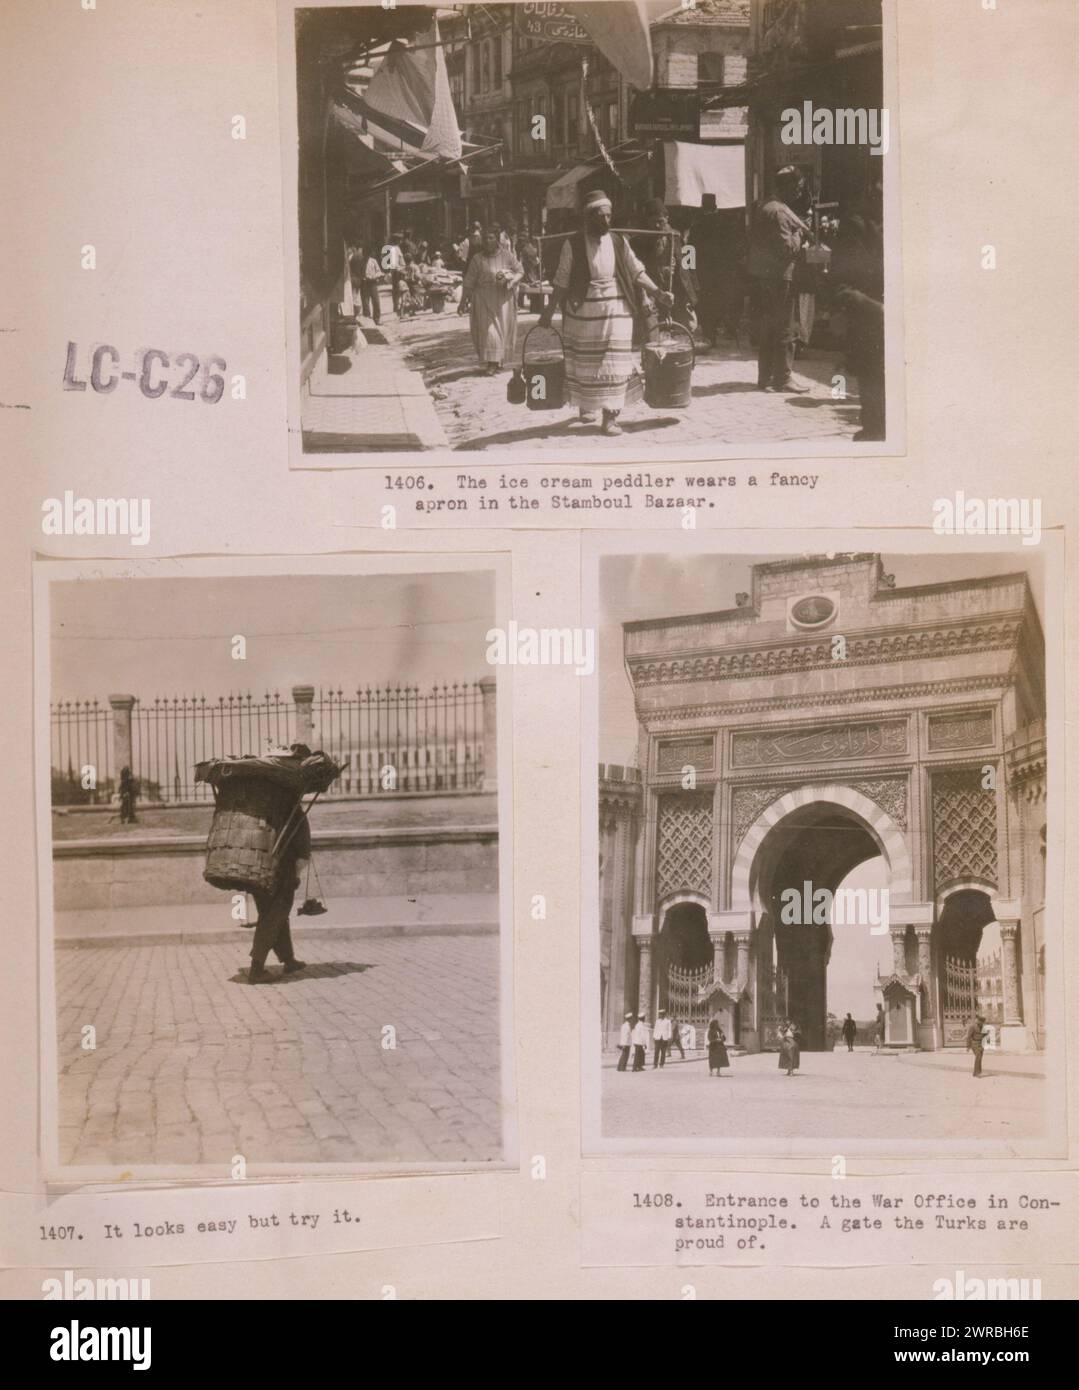 The ice cream peddler wears a fancy apron in the Stamboul Bazaar It looks easy but try it, Entrance to the War Office in Constantinople. A gate the Turks are proud of., Photographs show an ice cream vendor walking in the street in a market, a street vendor with a basket on his back, and a gate marking the entrance to the War Office, now part of Istanbul University, Istanbul, Turkey., Carpenter, Frank G. (Frank George), 1855-1924, photographer, 1923., Street vendors, Turkey, Istanbul, 1920-1930, Gelatin silver prints, 1920-1930., Gelatin silver prints, 1920-1930 Stock Photo